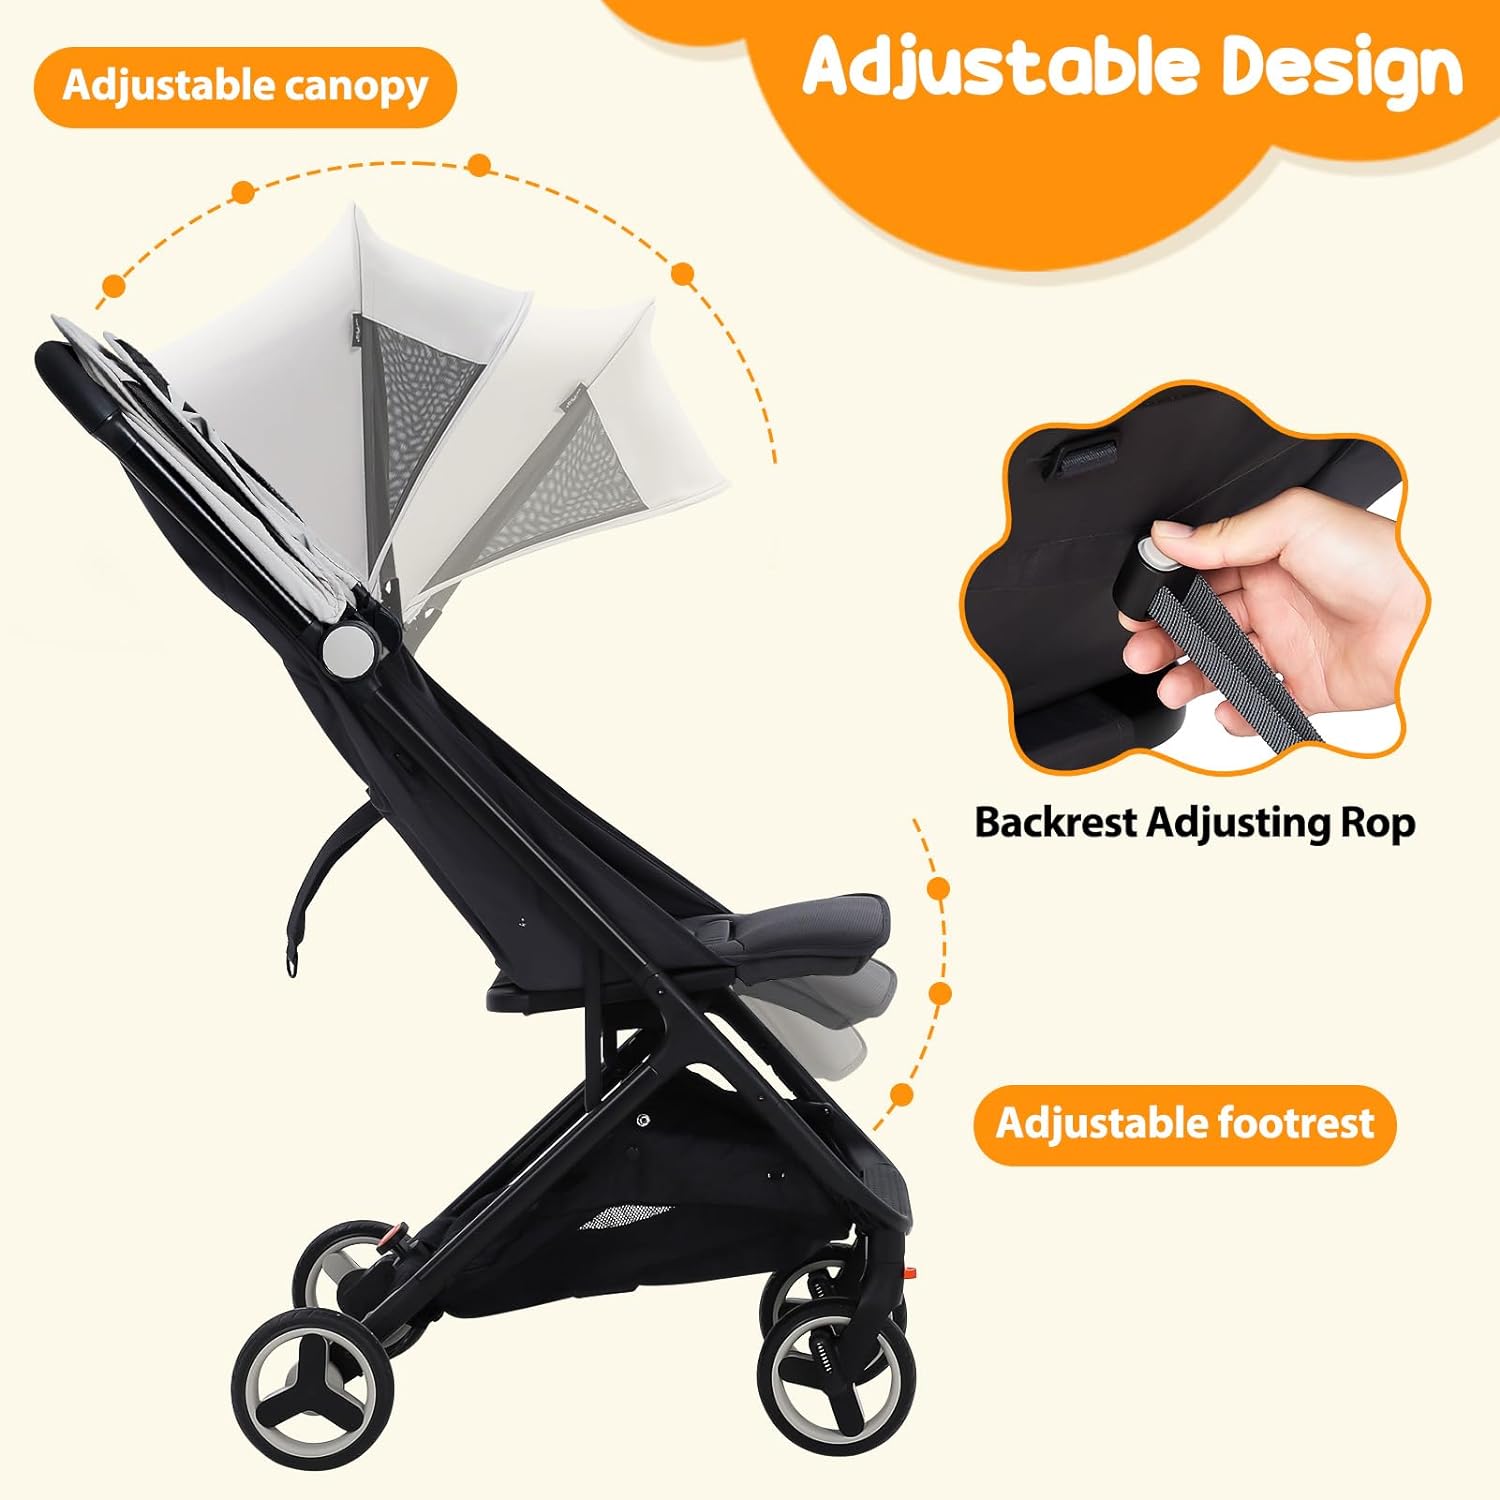 Lightweight Stroller, Compact One-Hand Fold Travel Stroller for Airplane Friendly, Reclining Seat and Canopy